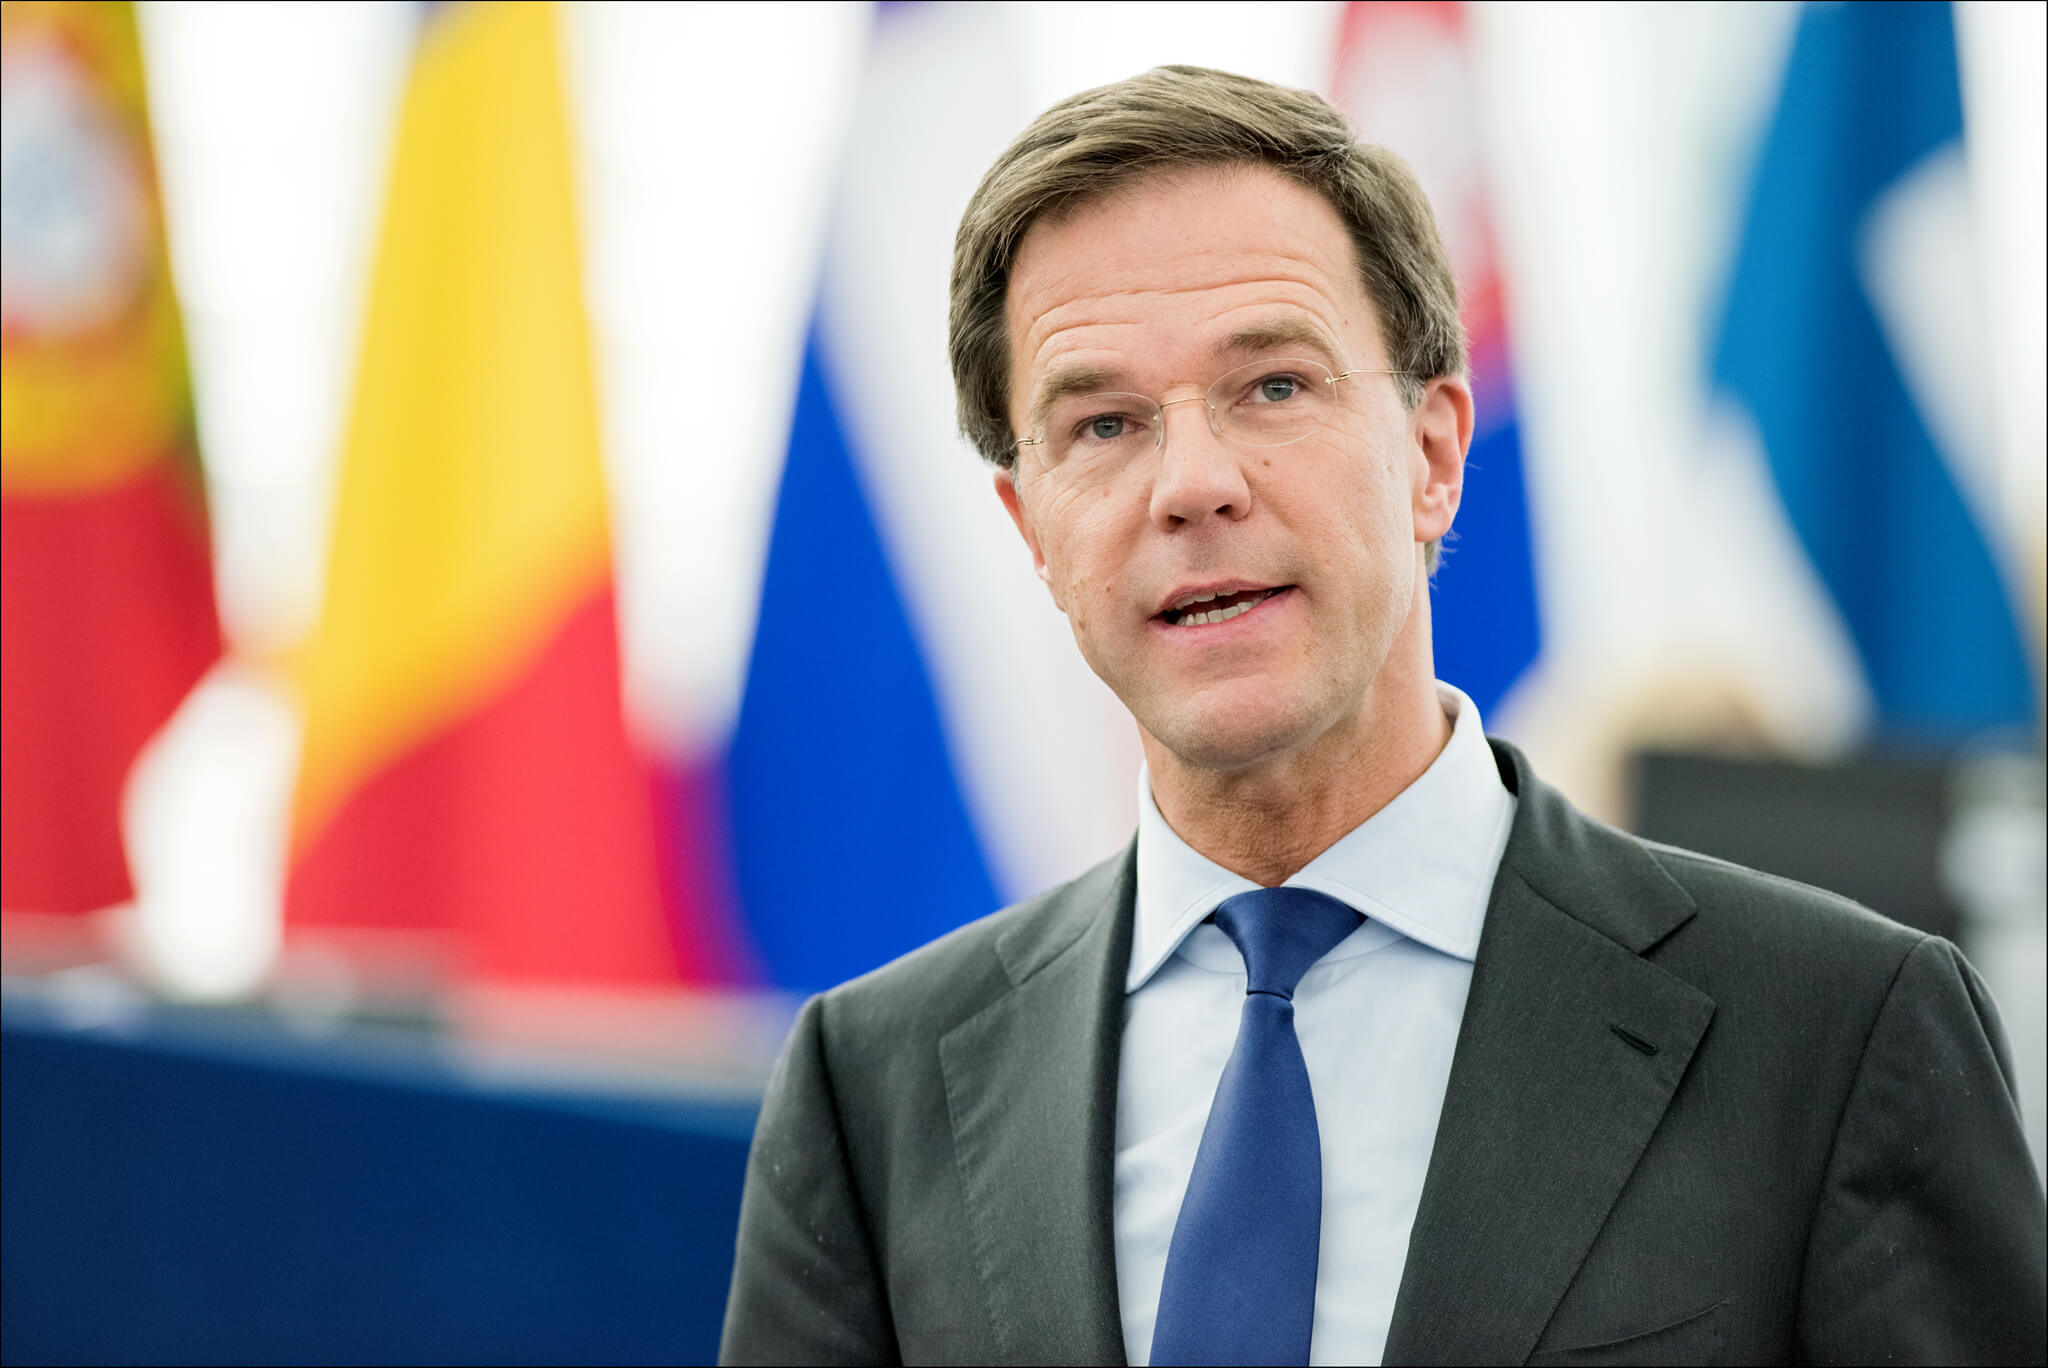 Schout-Mark Rutte debating the priorities of the Dutch Council Presidency with MEPs-20jan2016-European Parliament Flickr